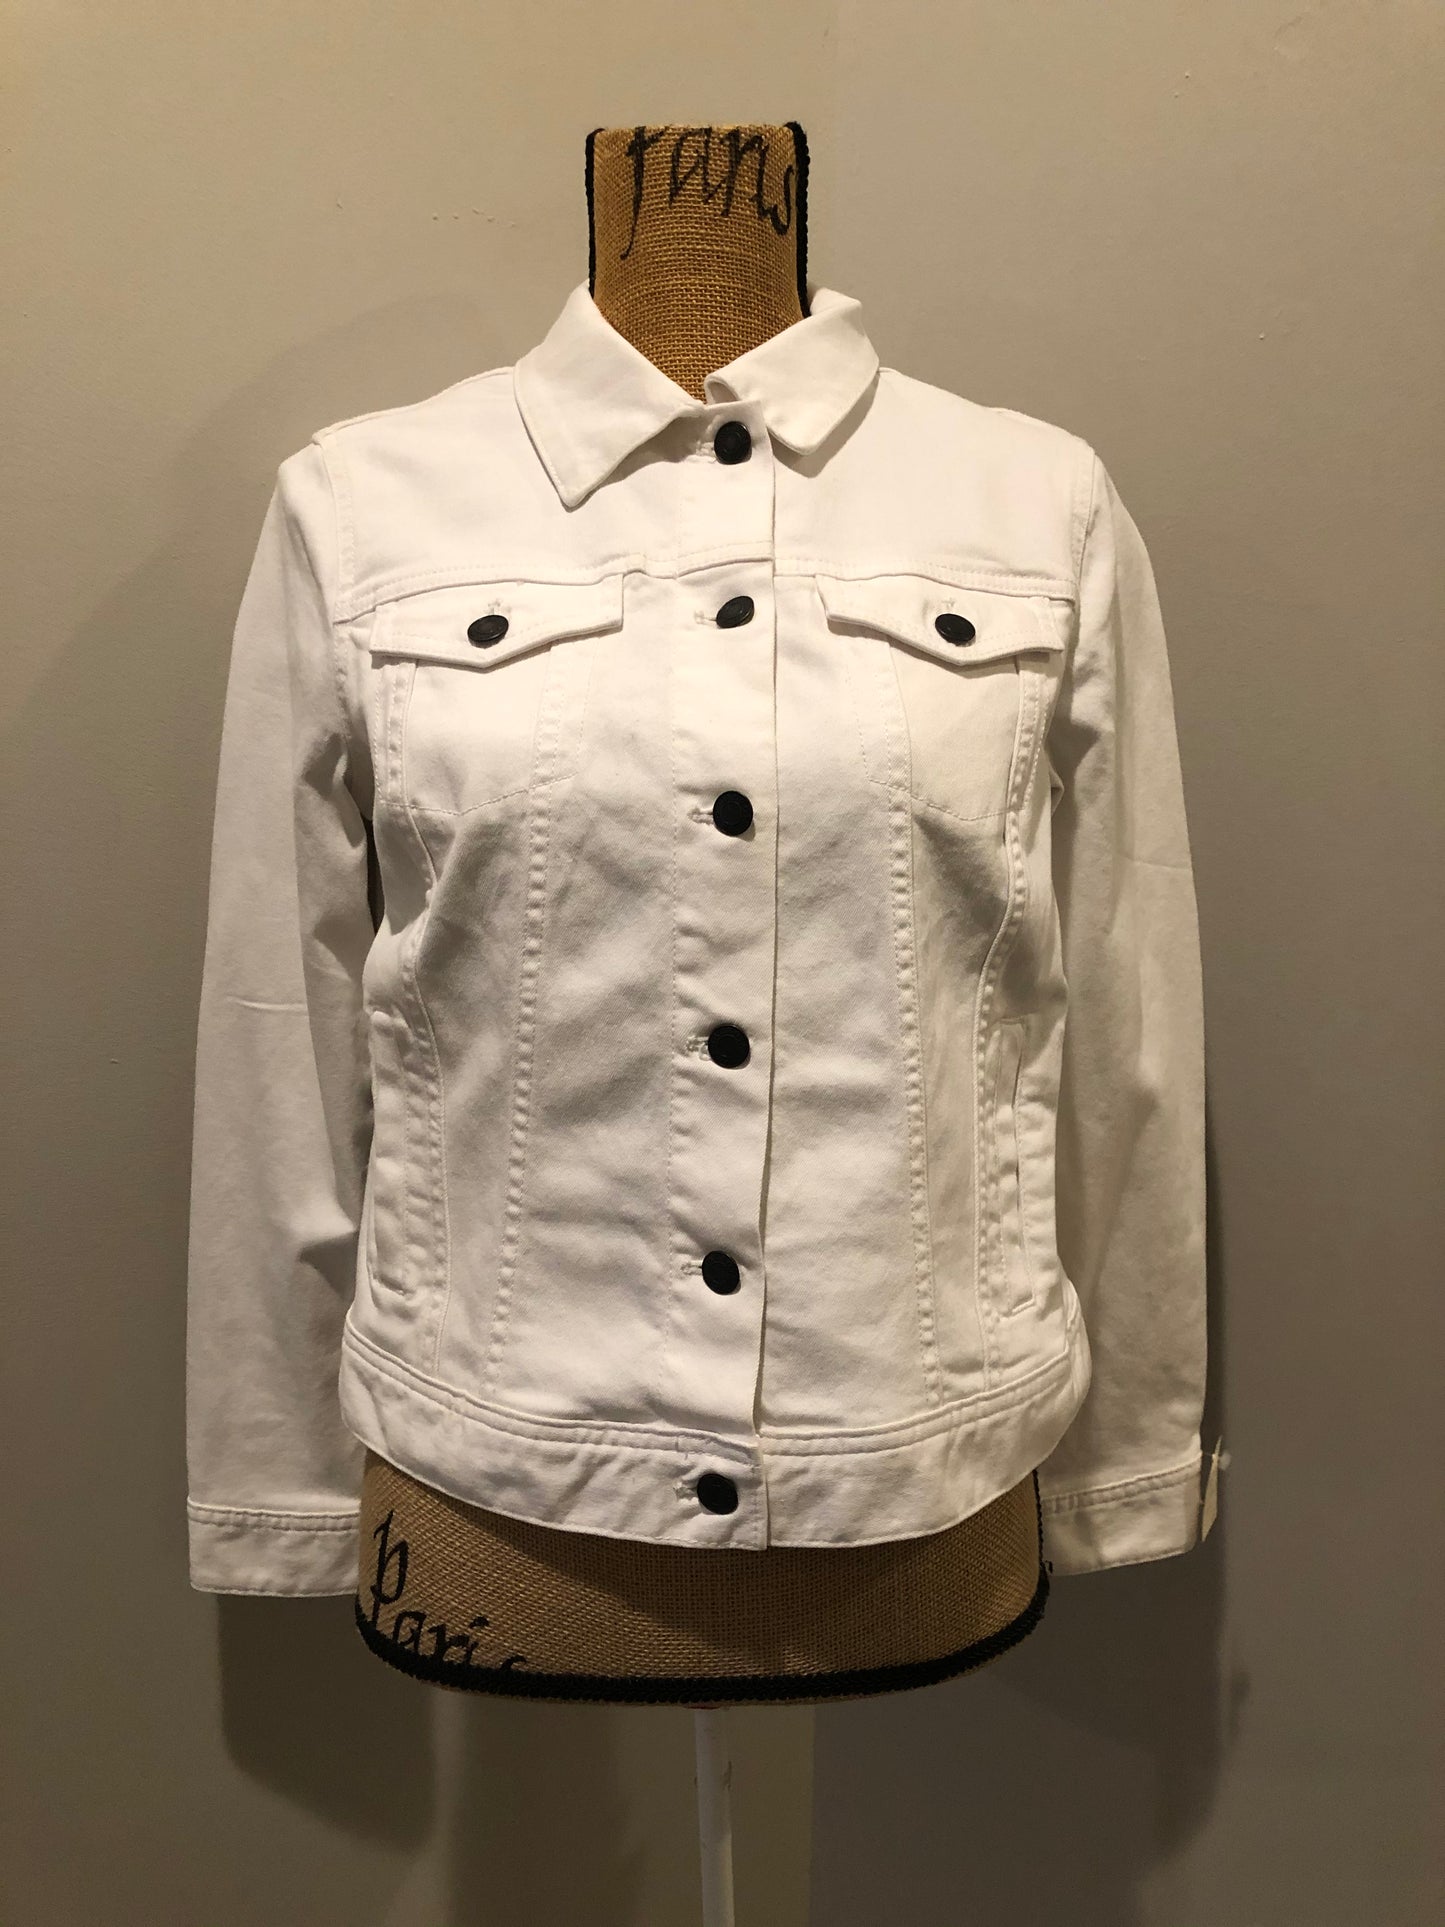 Kingspier Vintage - Talbots denim jacket in white with button closures, two vertical pockets and two flap pockets on the chest. Size small petite.